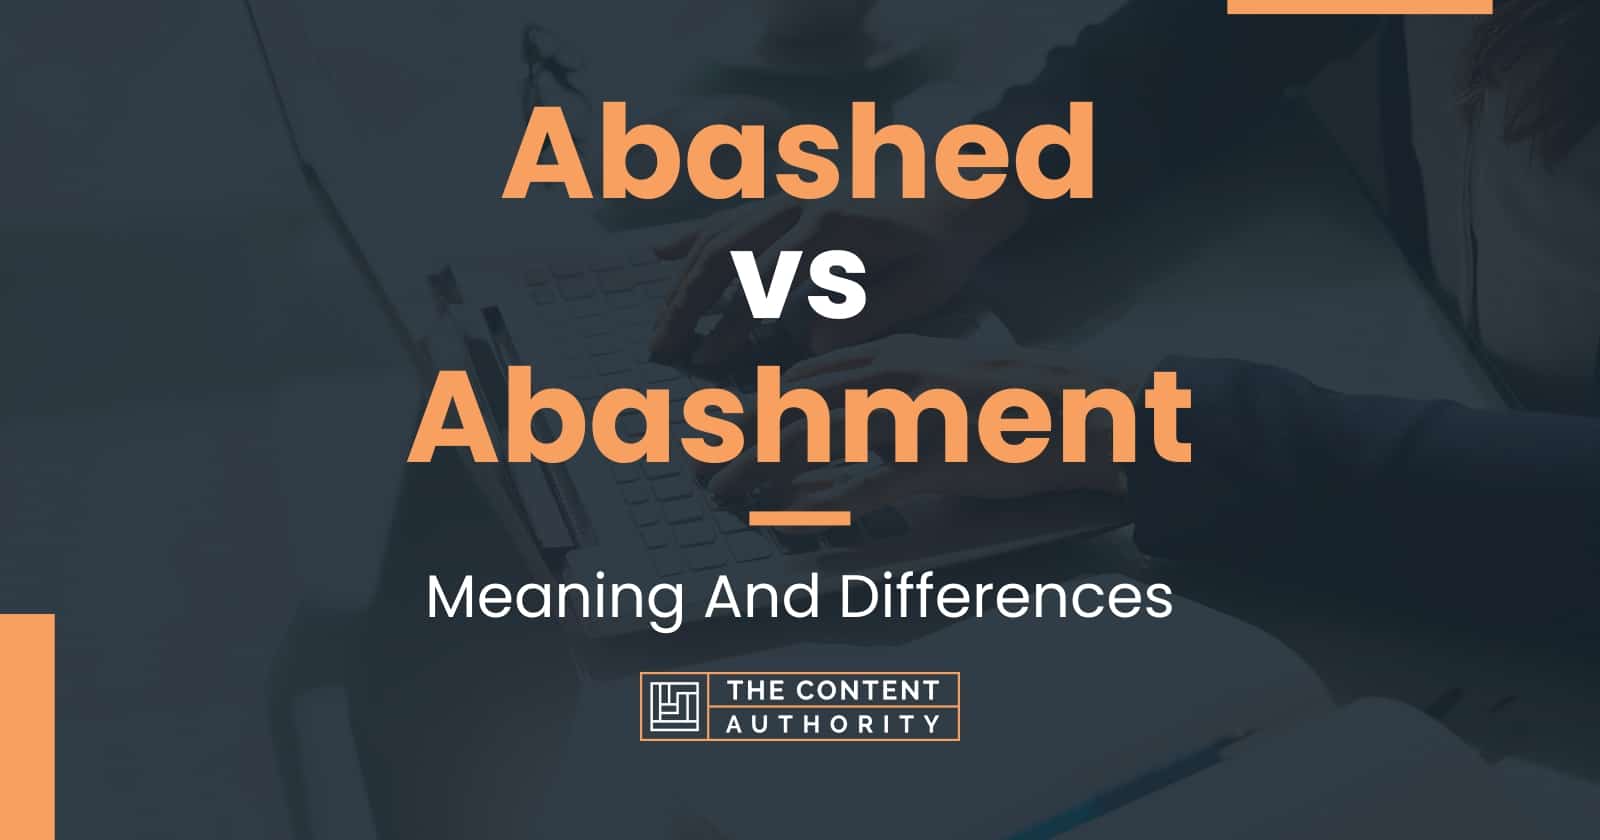 Abashed vs Abashment: Meaning And Differences